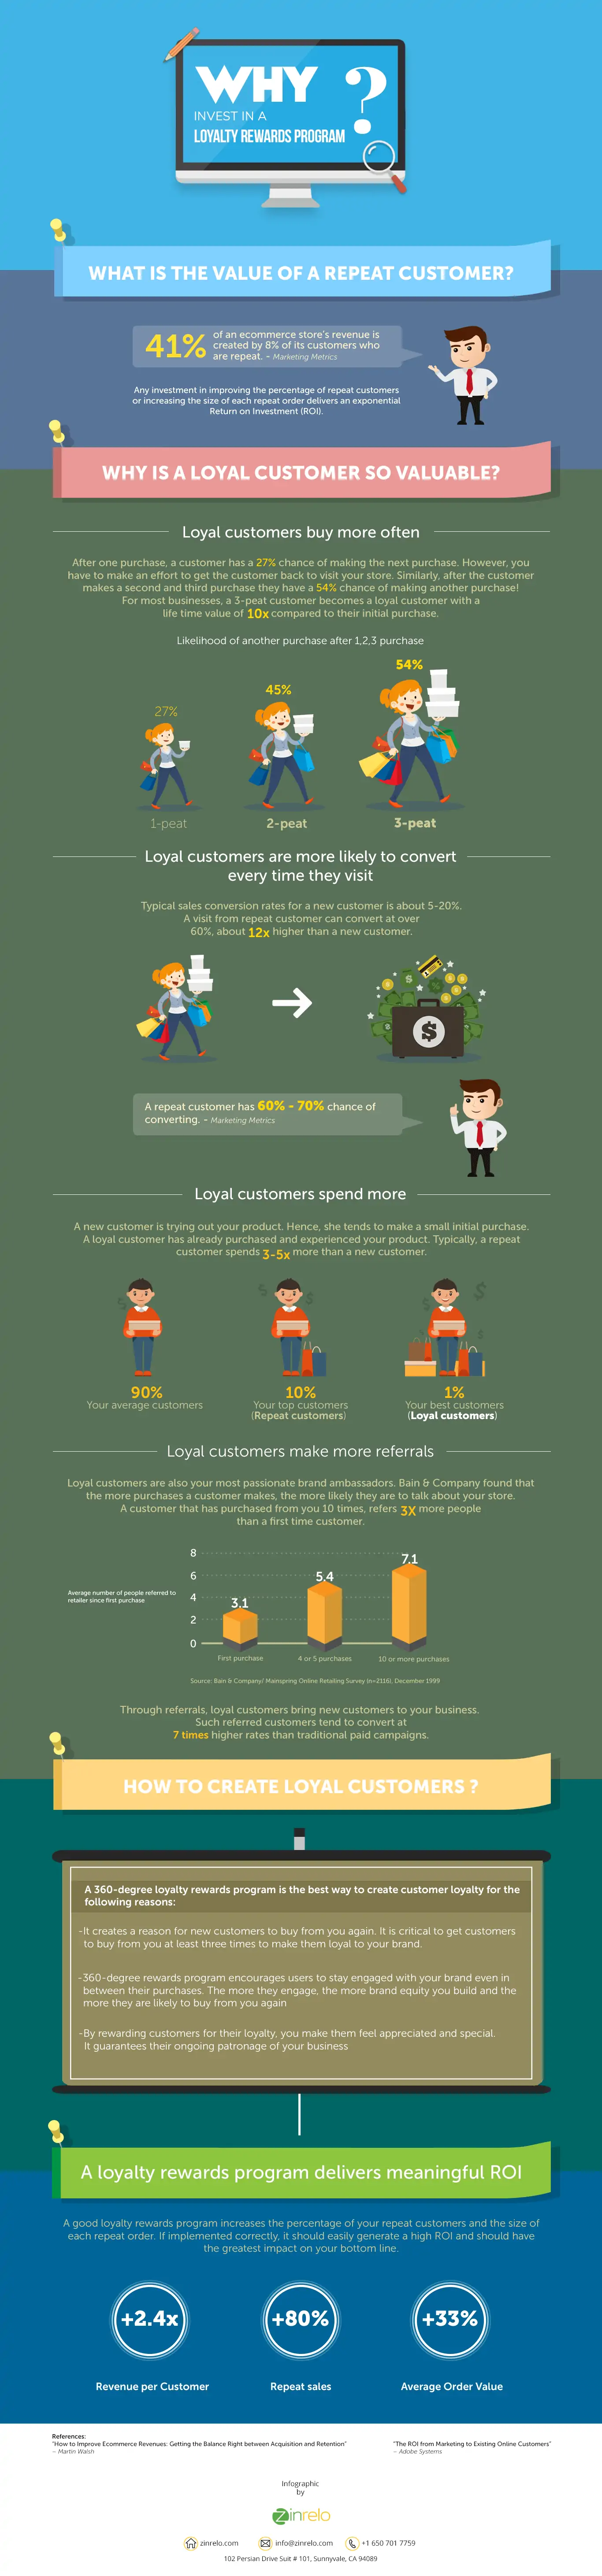 Why Invest in a Loyalty Rewards Program - Infographic by Zinrelo